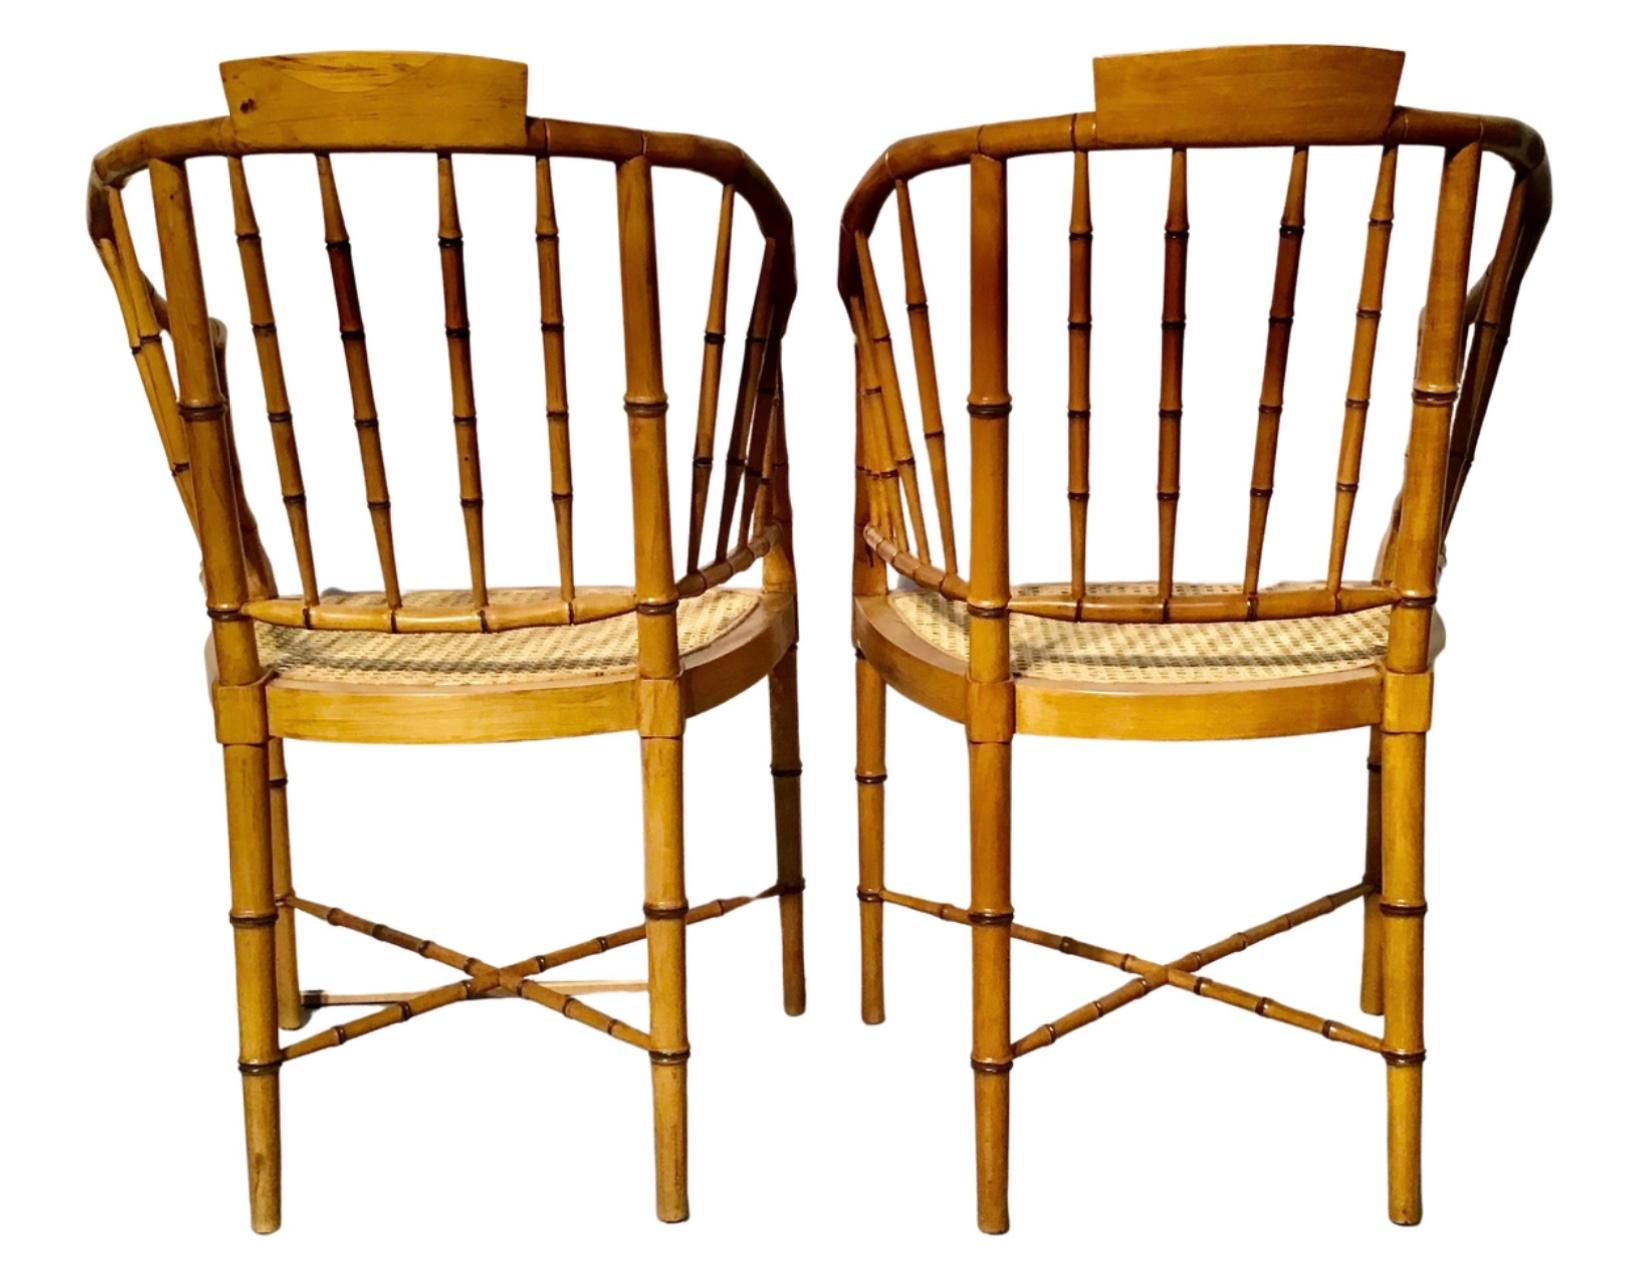 A pair of vintage Baker Furniture style faux-bamboo tub armchairs. Made of faux-bamboo, each of this pair of American Baker style chairs features a tub shaped back and curved arms resting on a cane seat. Each chair is raised on four slender legs,